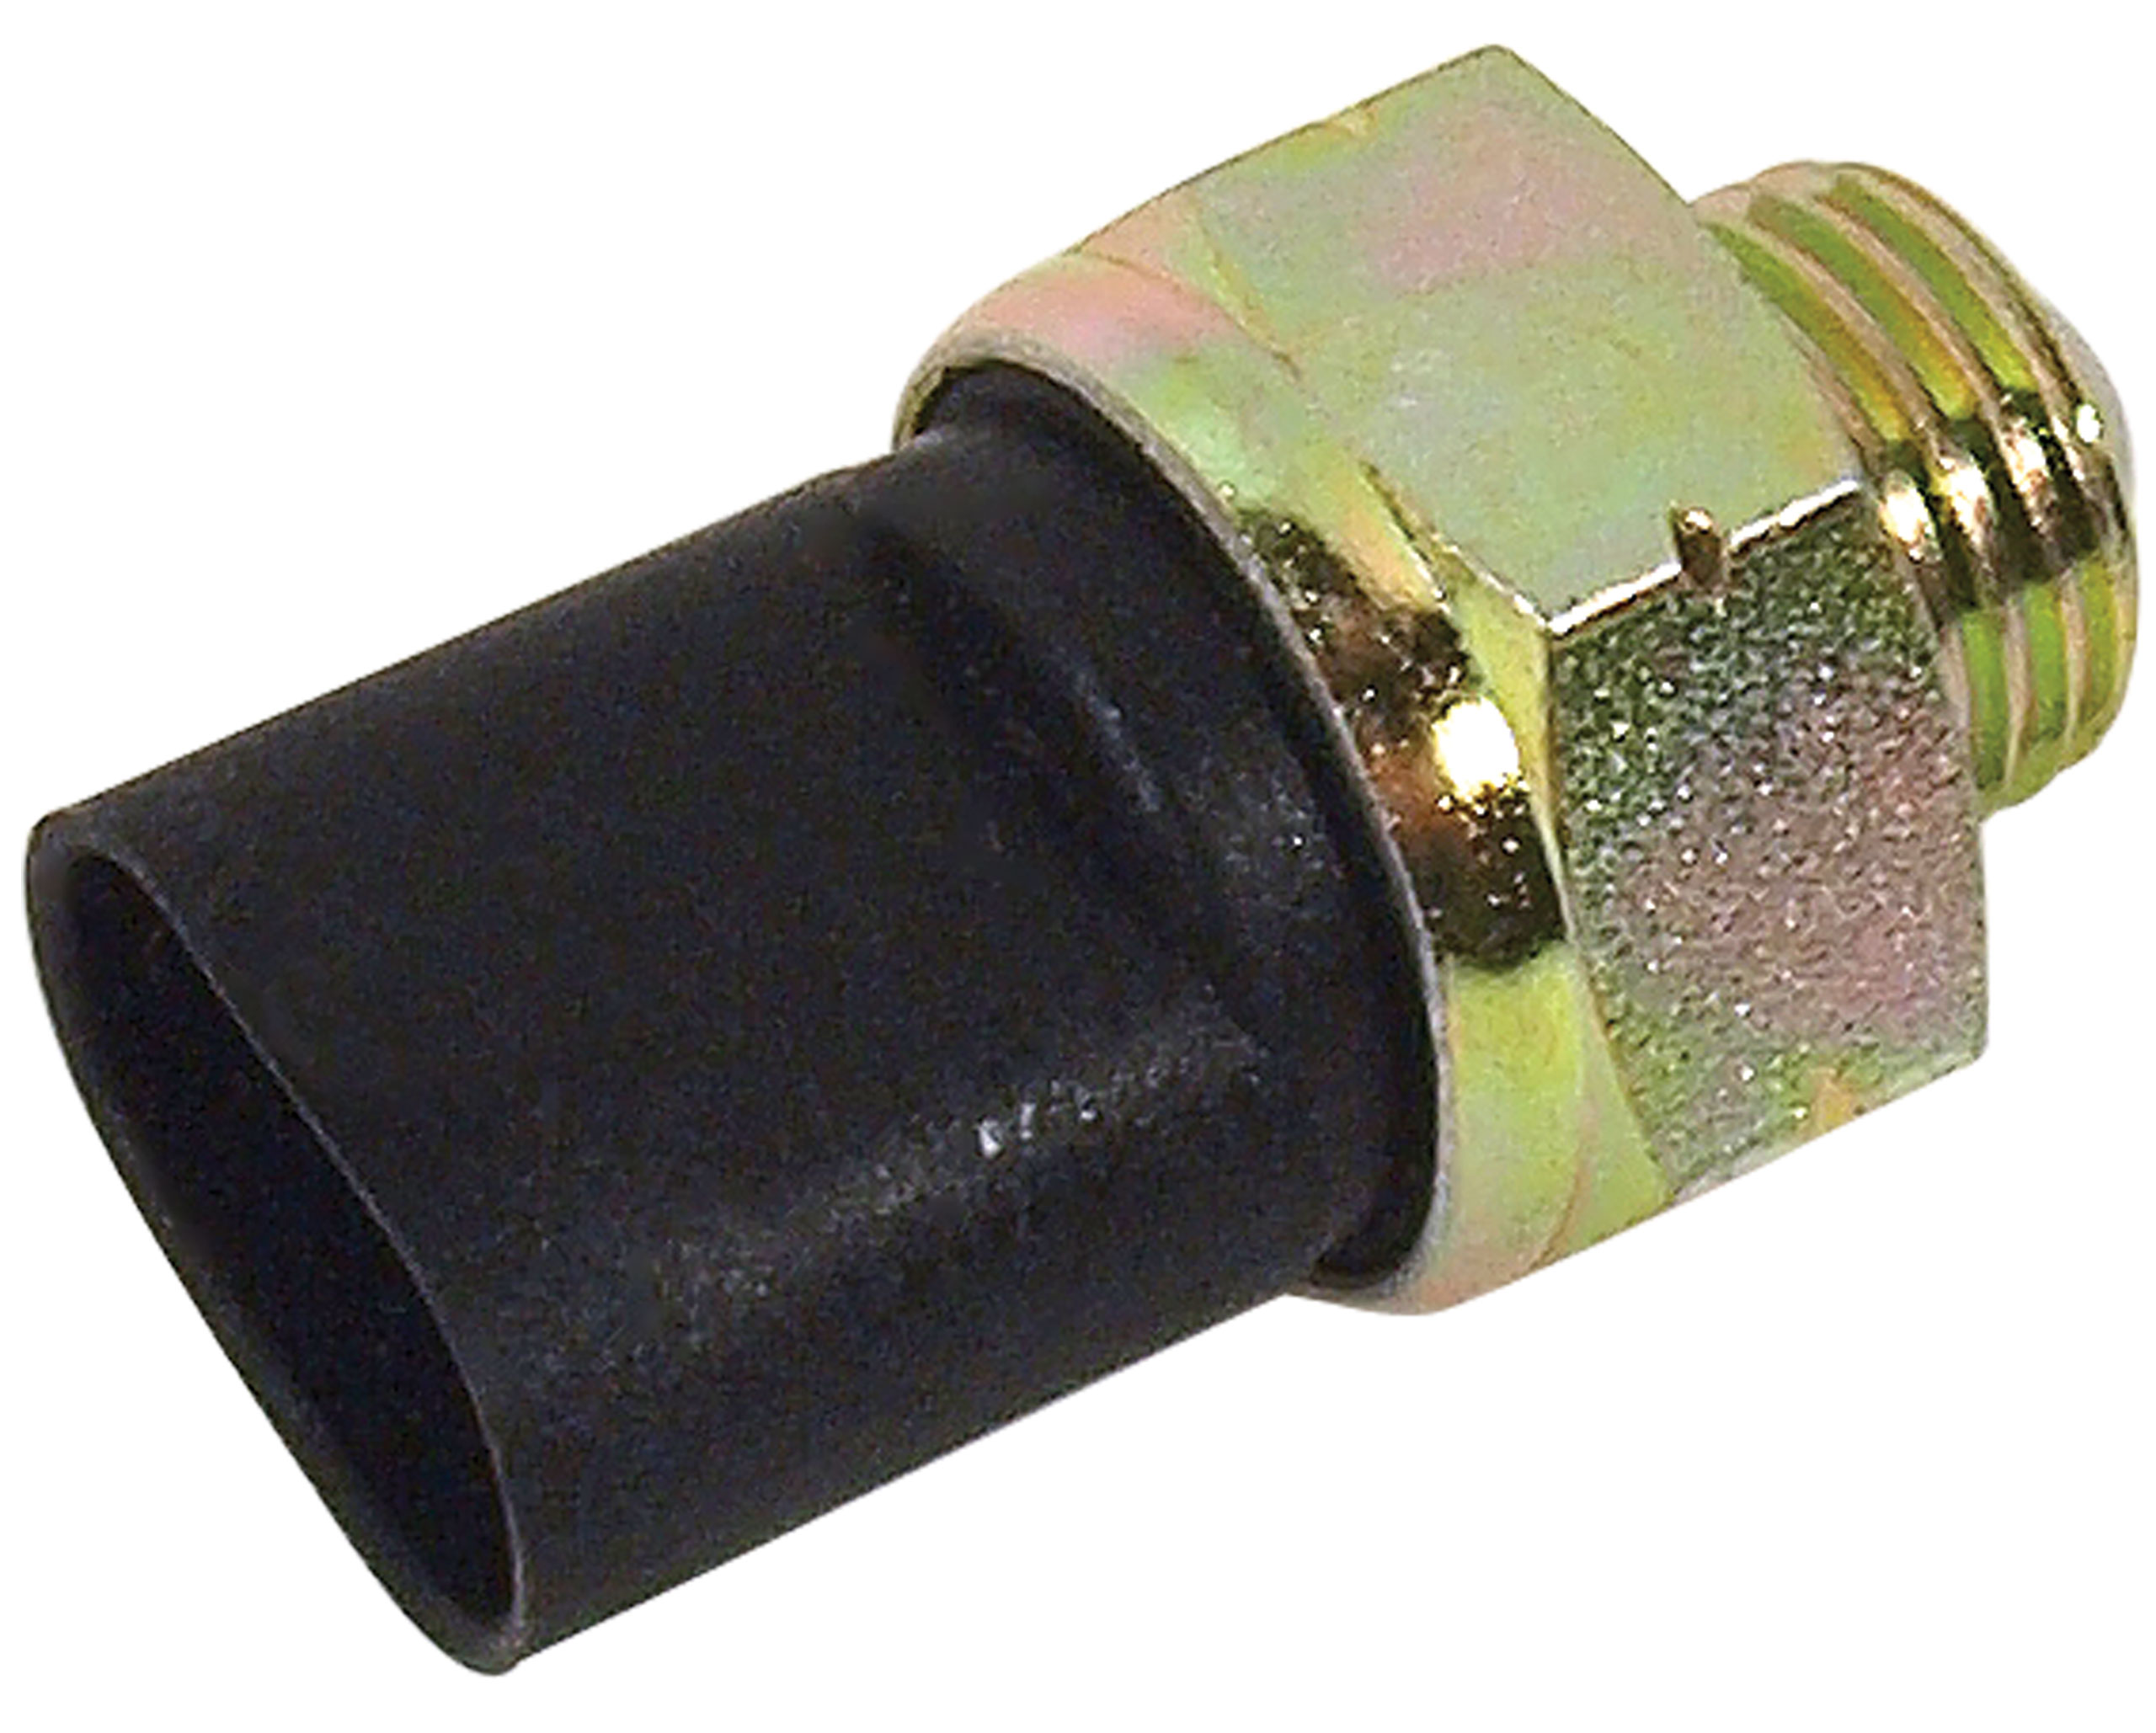 C4 1984-1988 Chevrolet Corvette Transmission Overdrive Override Switch - Lectric Limited, Inc.